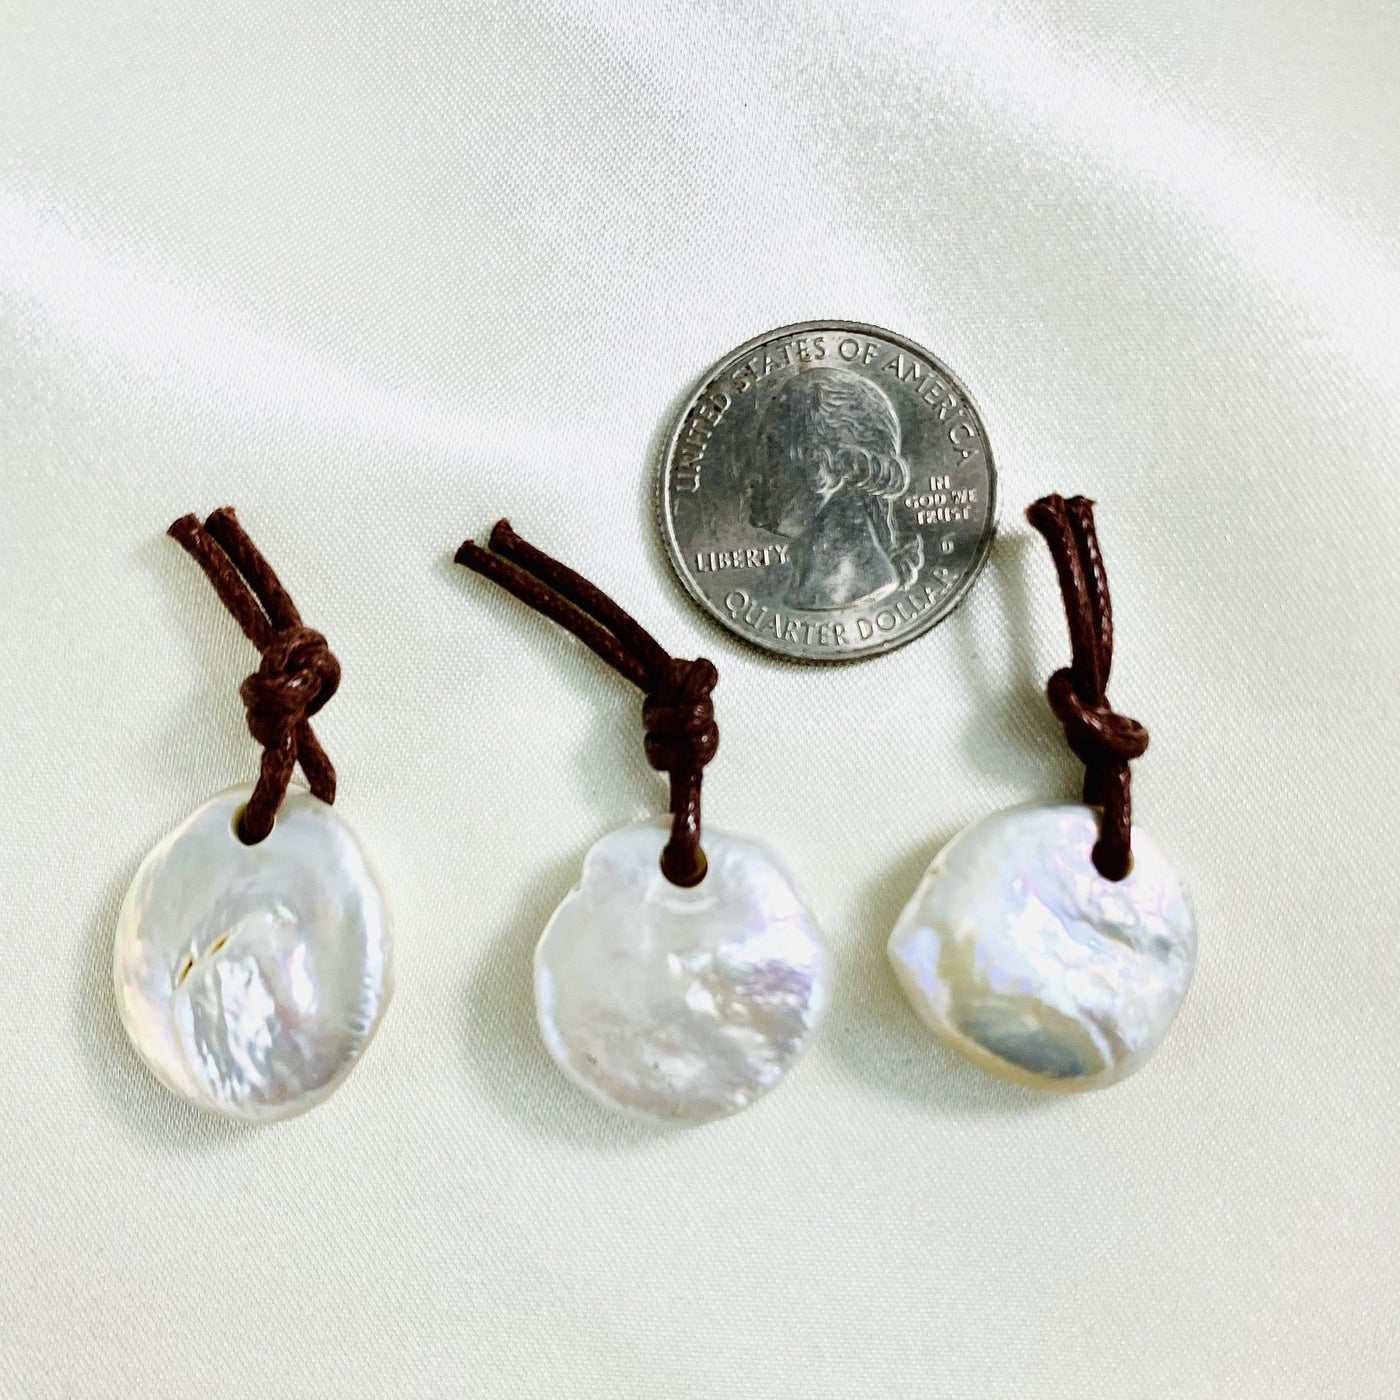 Mother of Pearl Round Pendants - 3 next to a quarter